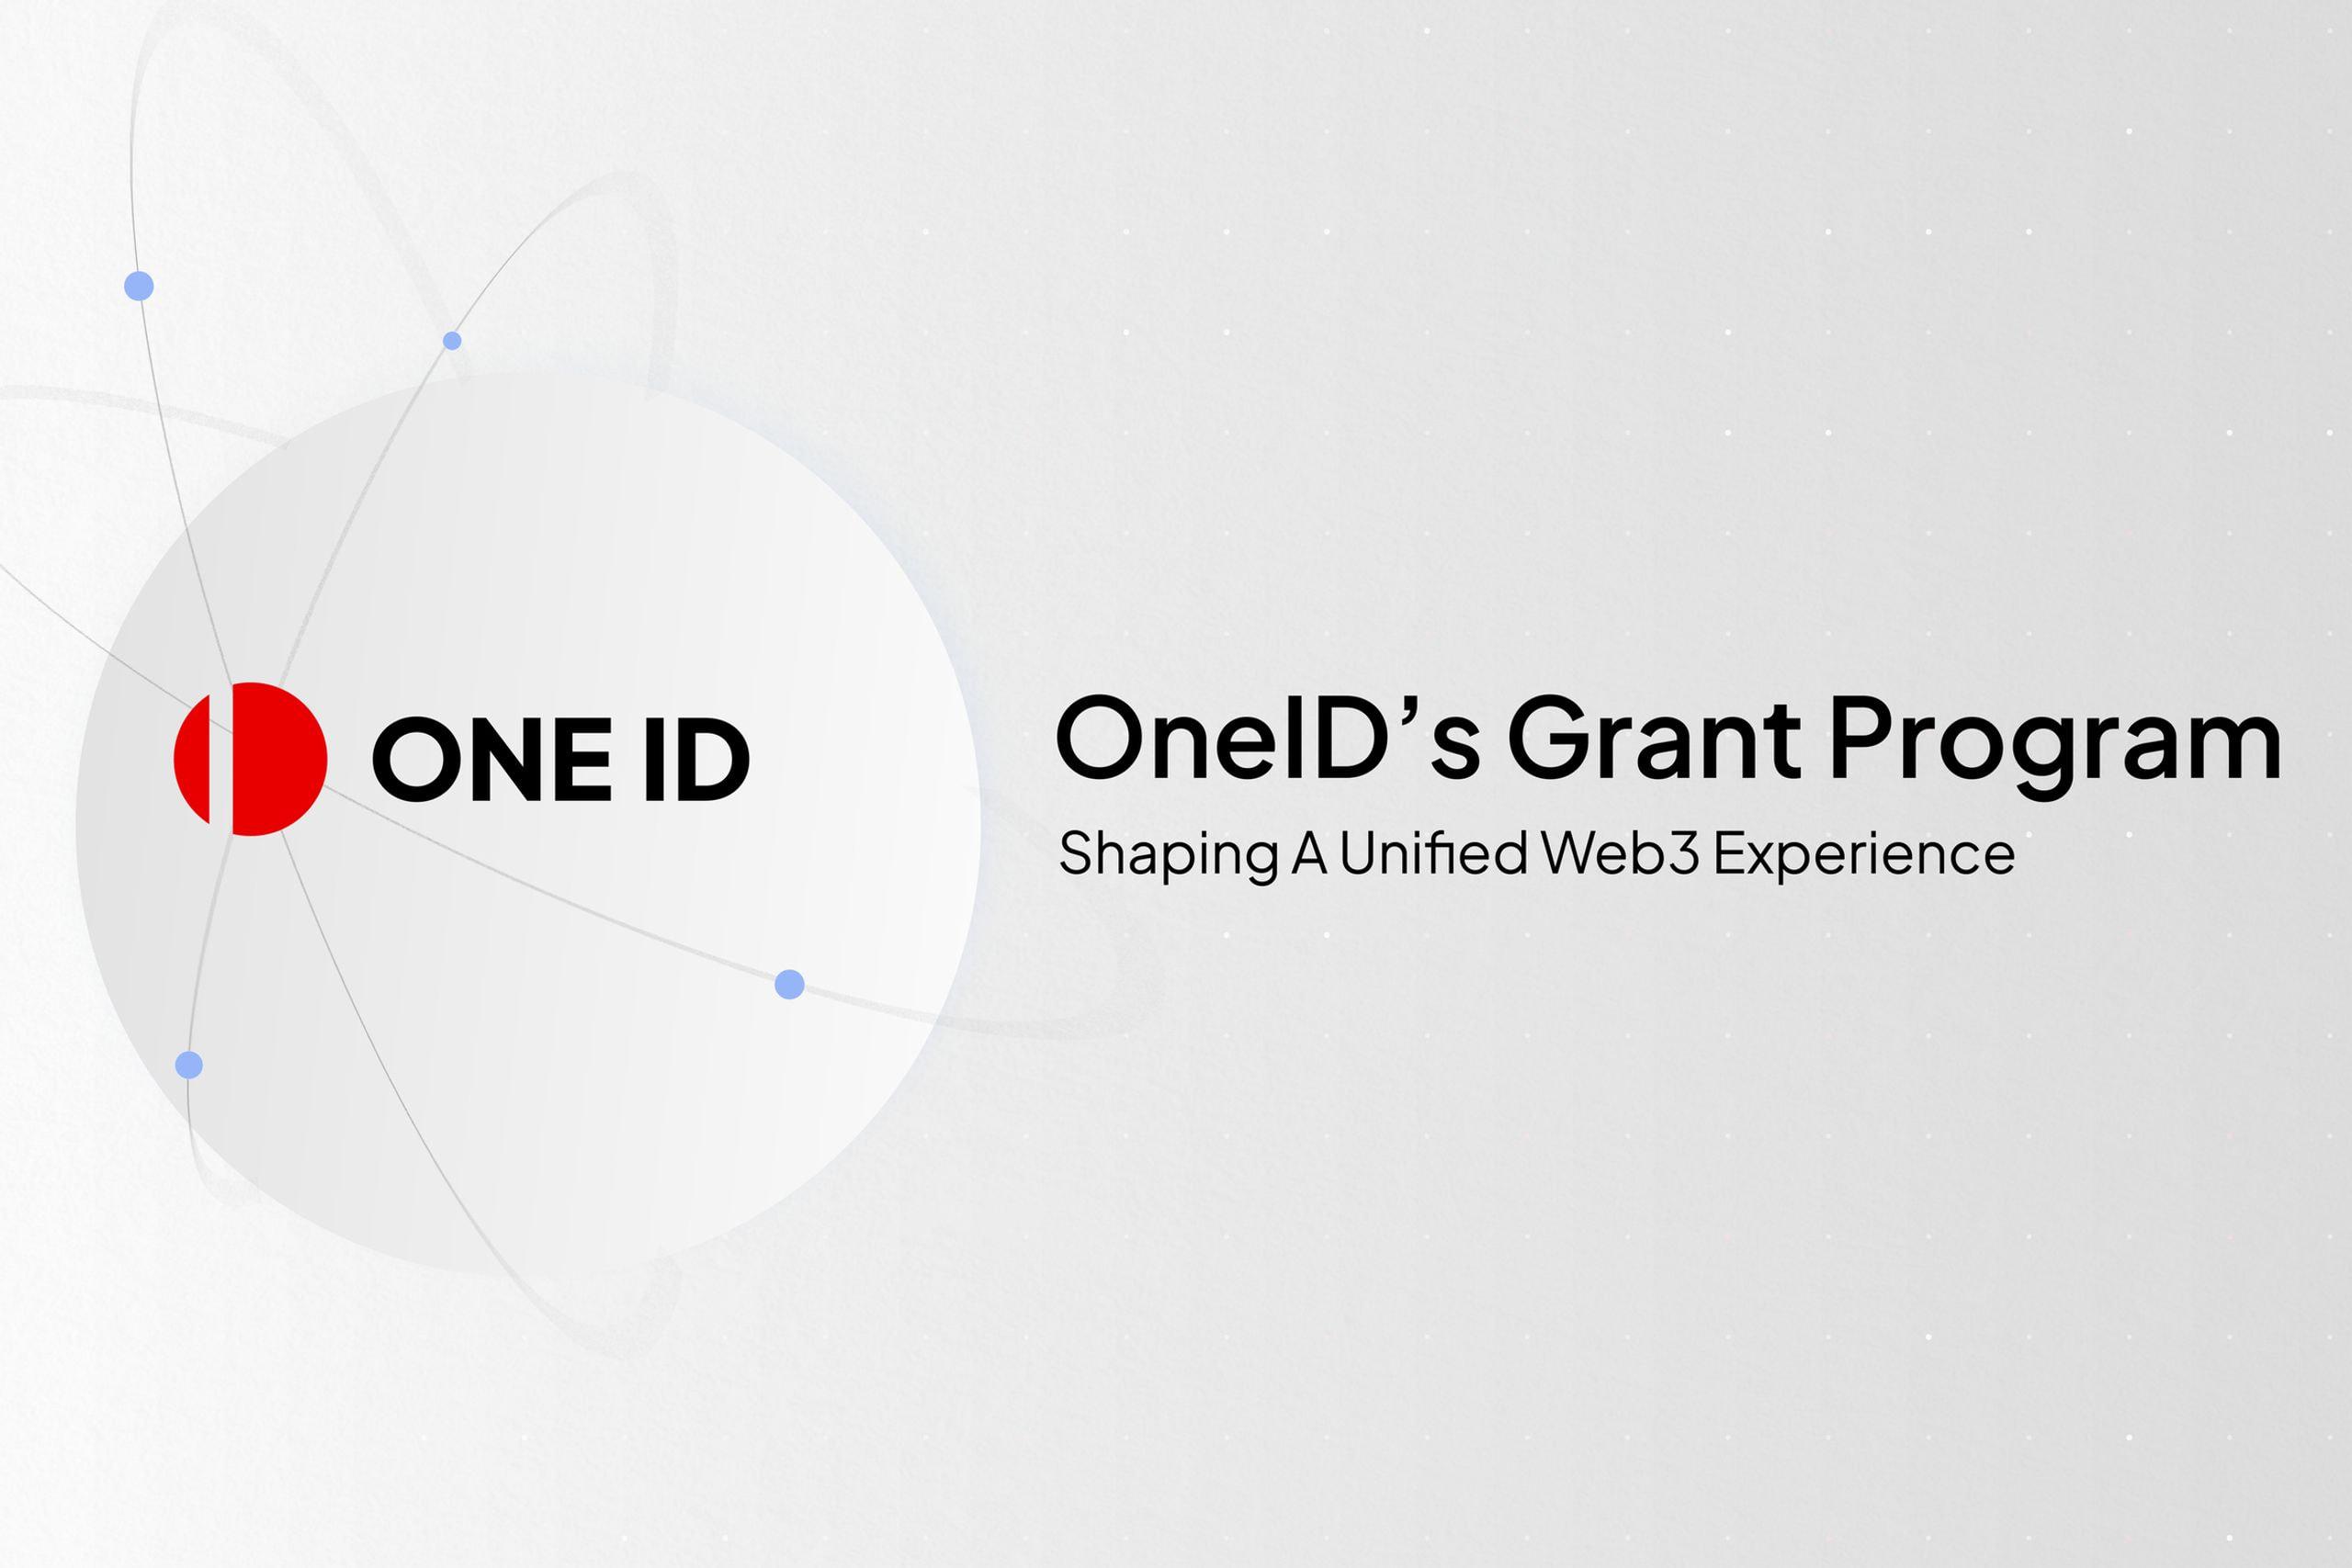 Introducing OneID’s Grant Program: 
Shaping A Unified Web3 Experience